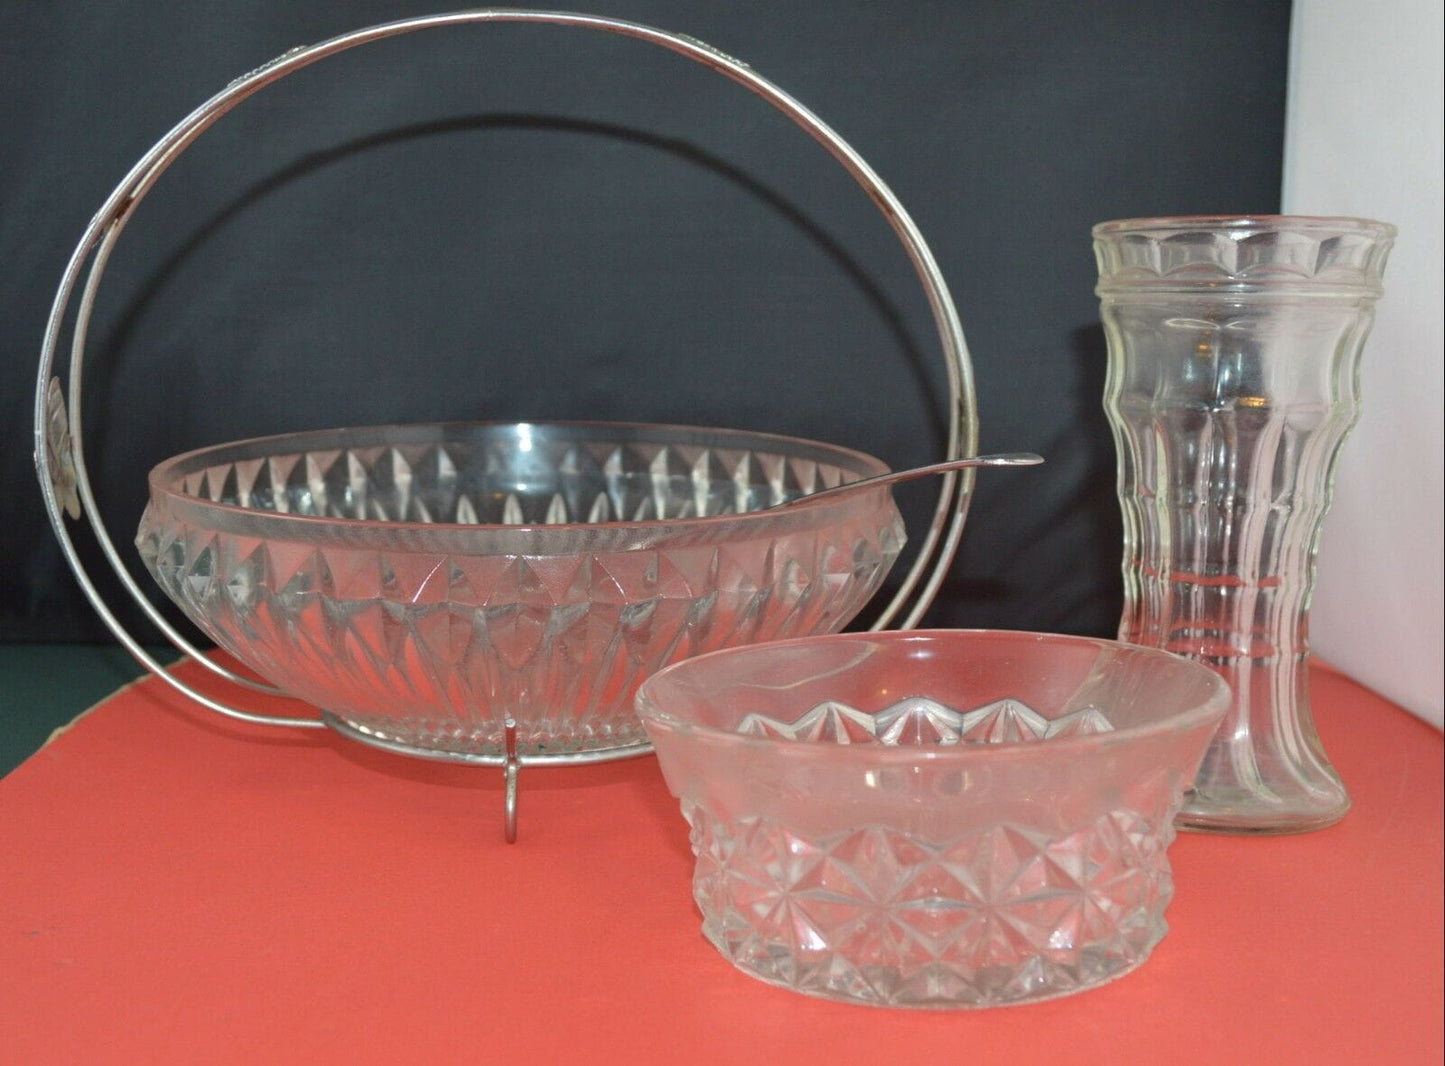 CUT GLASS VASE CUT GLASS SERVER WITH METAL HOLDER CUT GLASS SMALL DISH(PREVIOUSLY OWNED) GOOD CONDITION - TMD167207